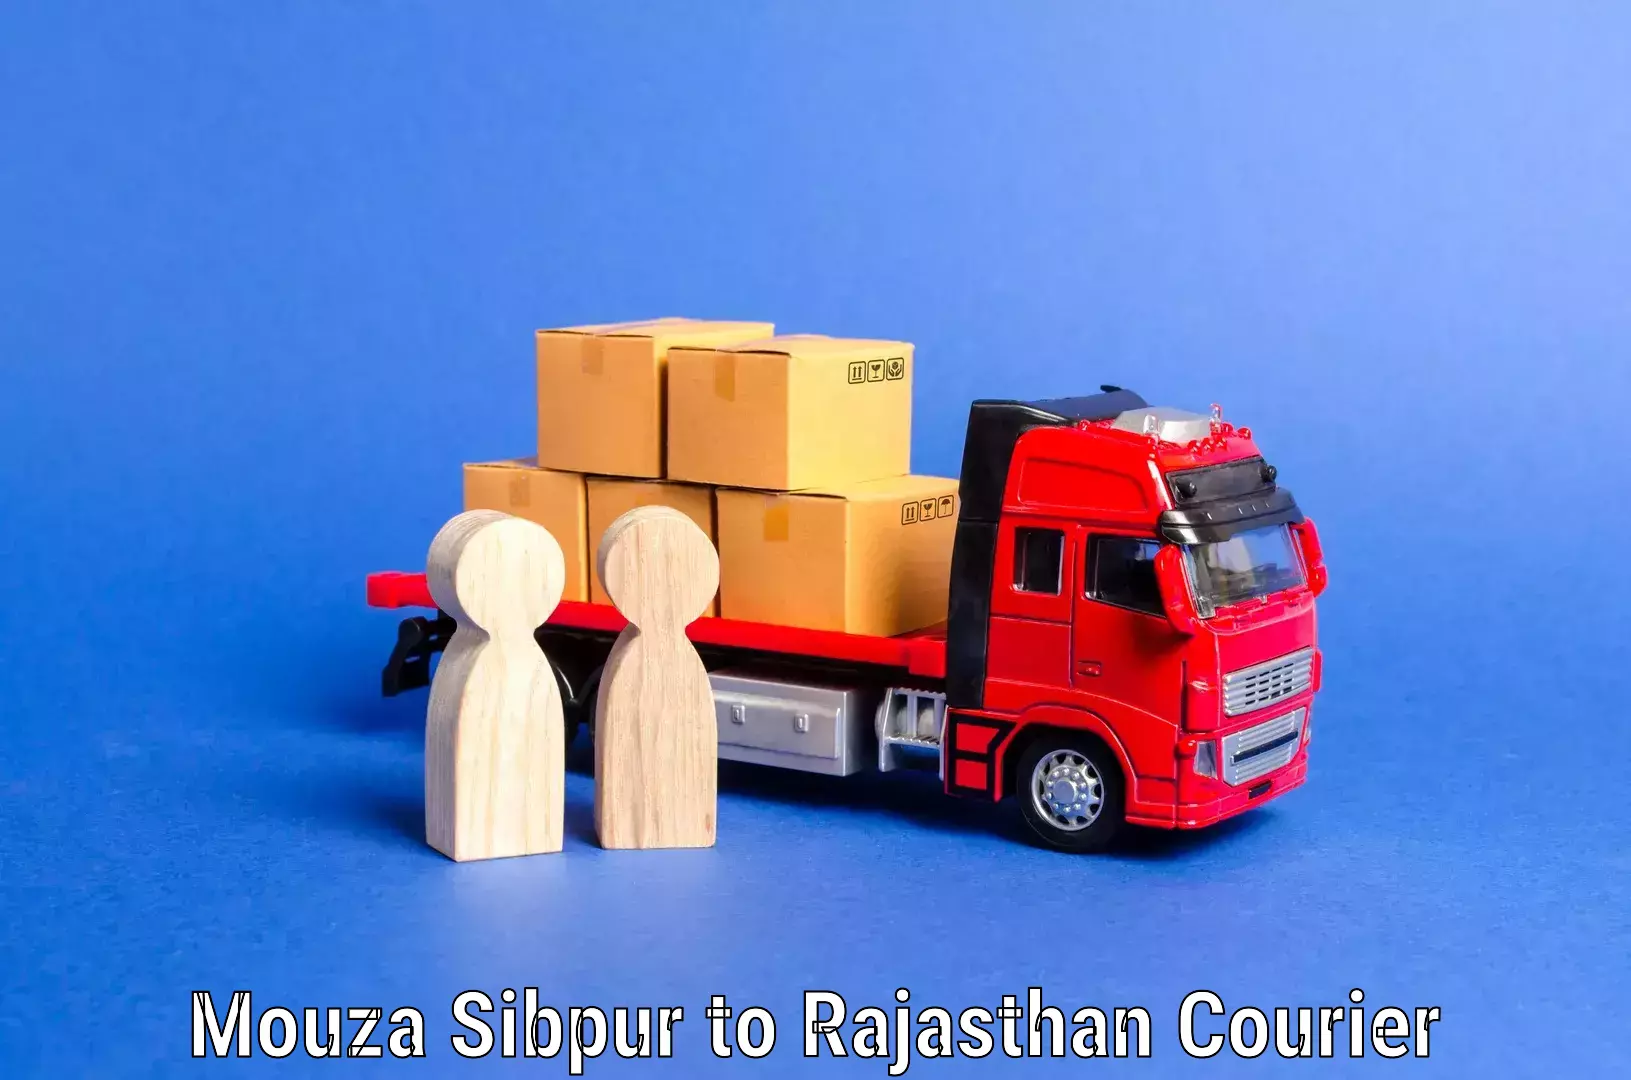 Furniture shipping services Mouza Sibpur to Rajasthan